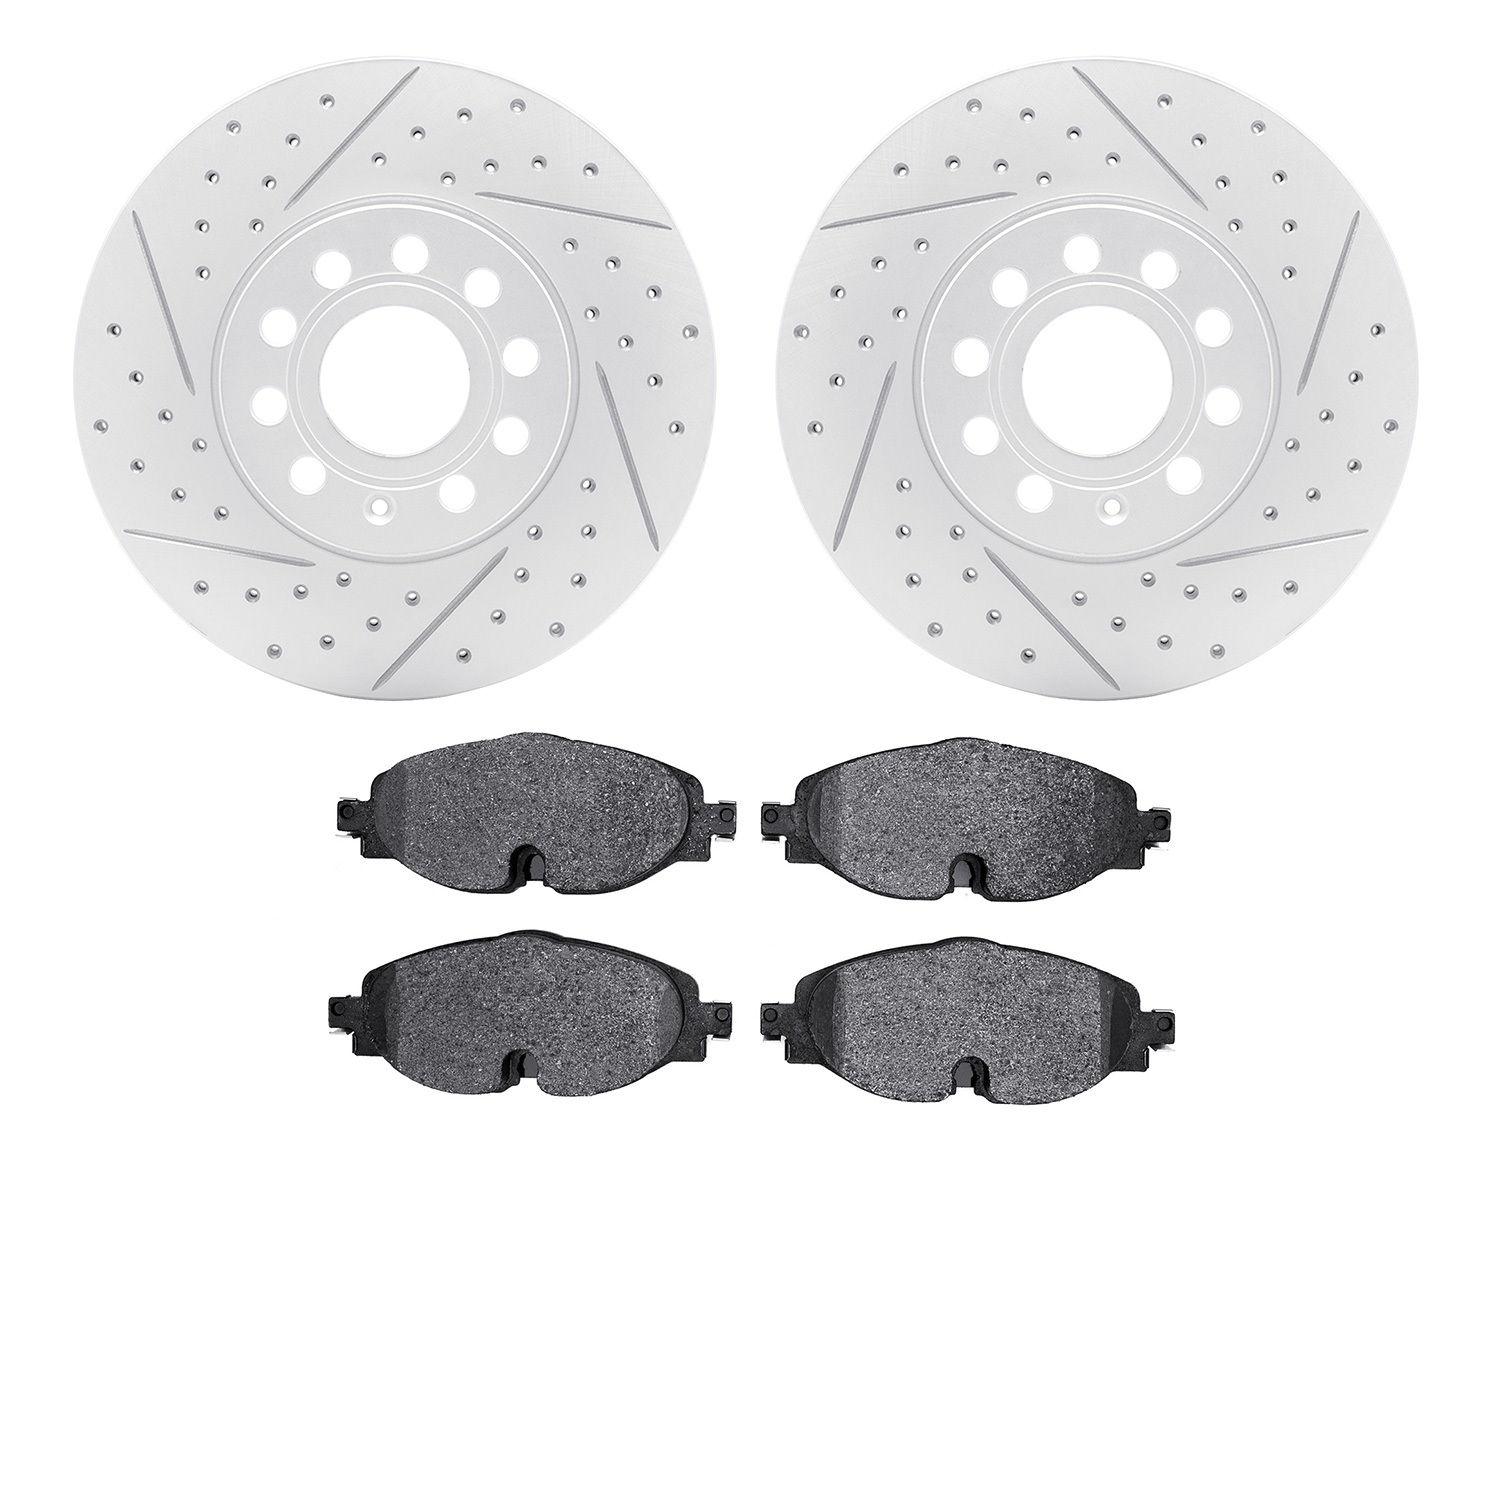 2602-74066 Geoperformance Drilled/Slotted Rotors w/5000 Euro Ceramic Brake Pads Kit, Fits Select Audi/Volkswagen, Position: Fron